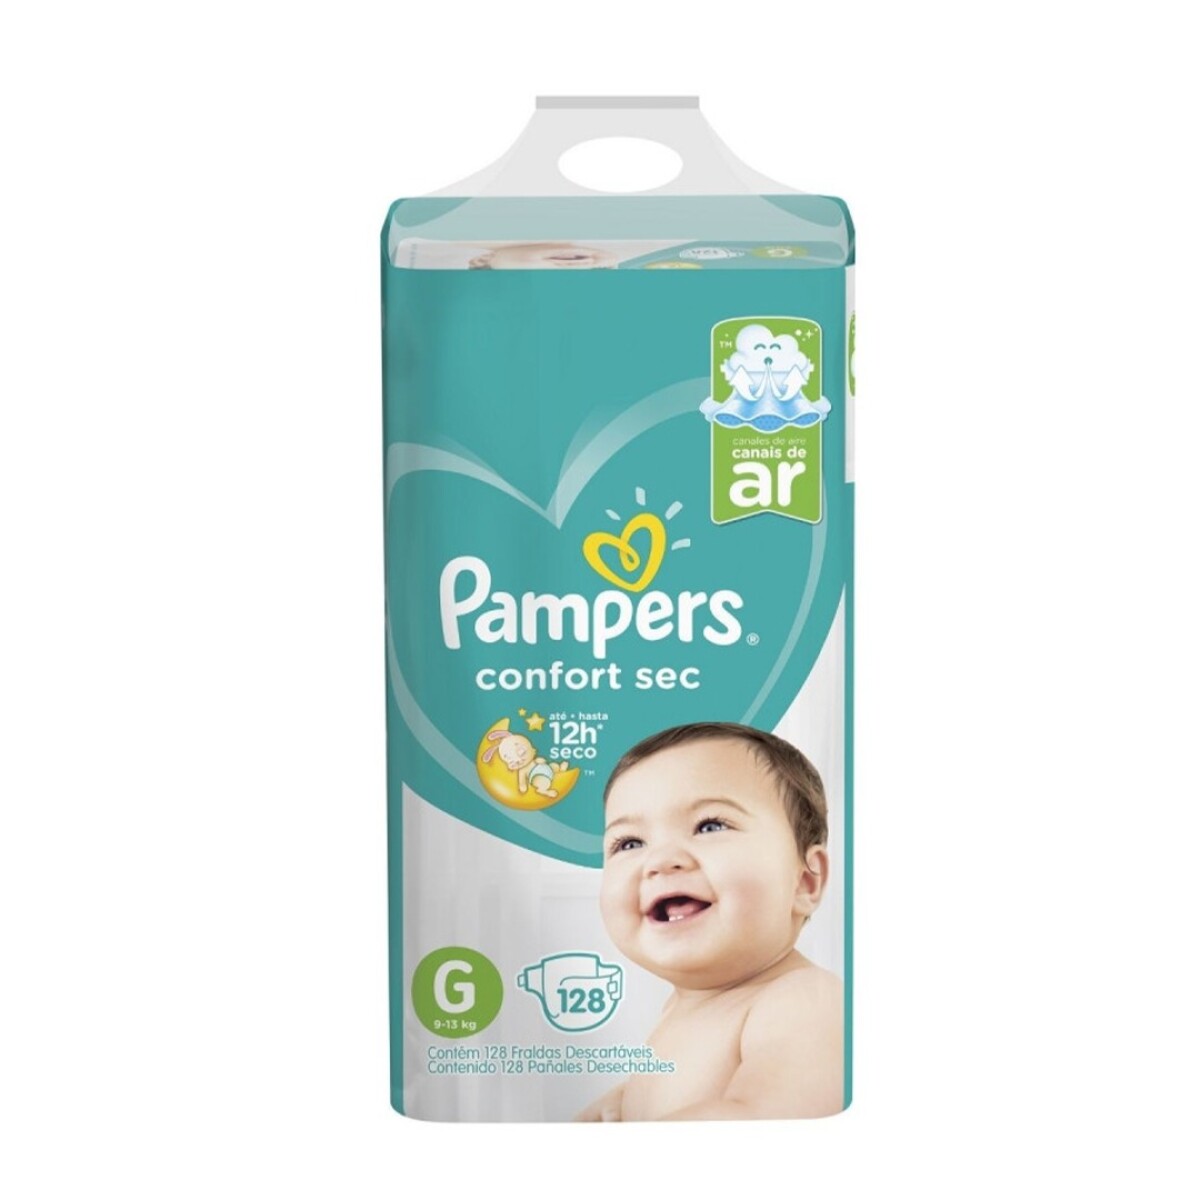 Pañales Pampers Confort Sec G 128 Unidades - 001 